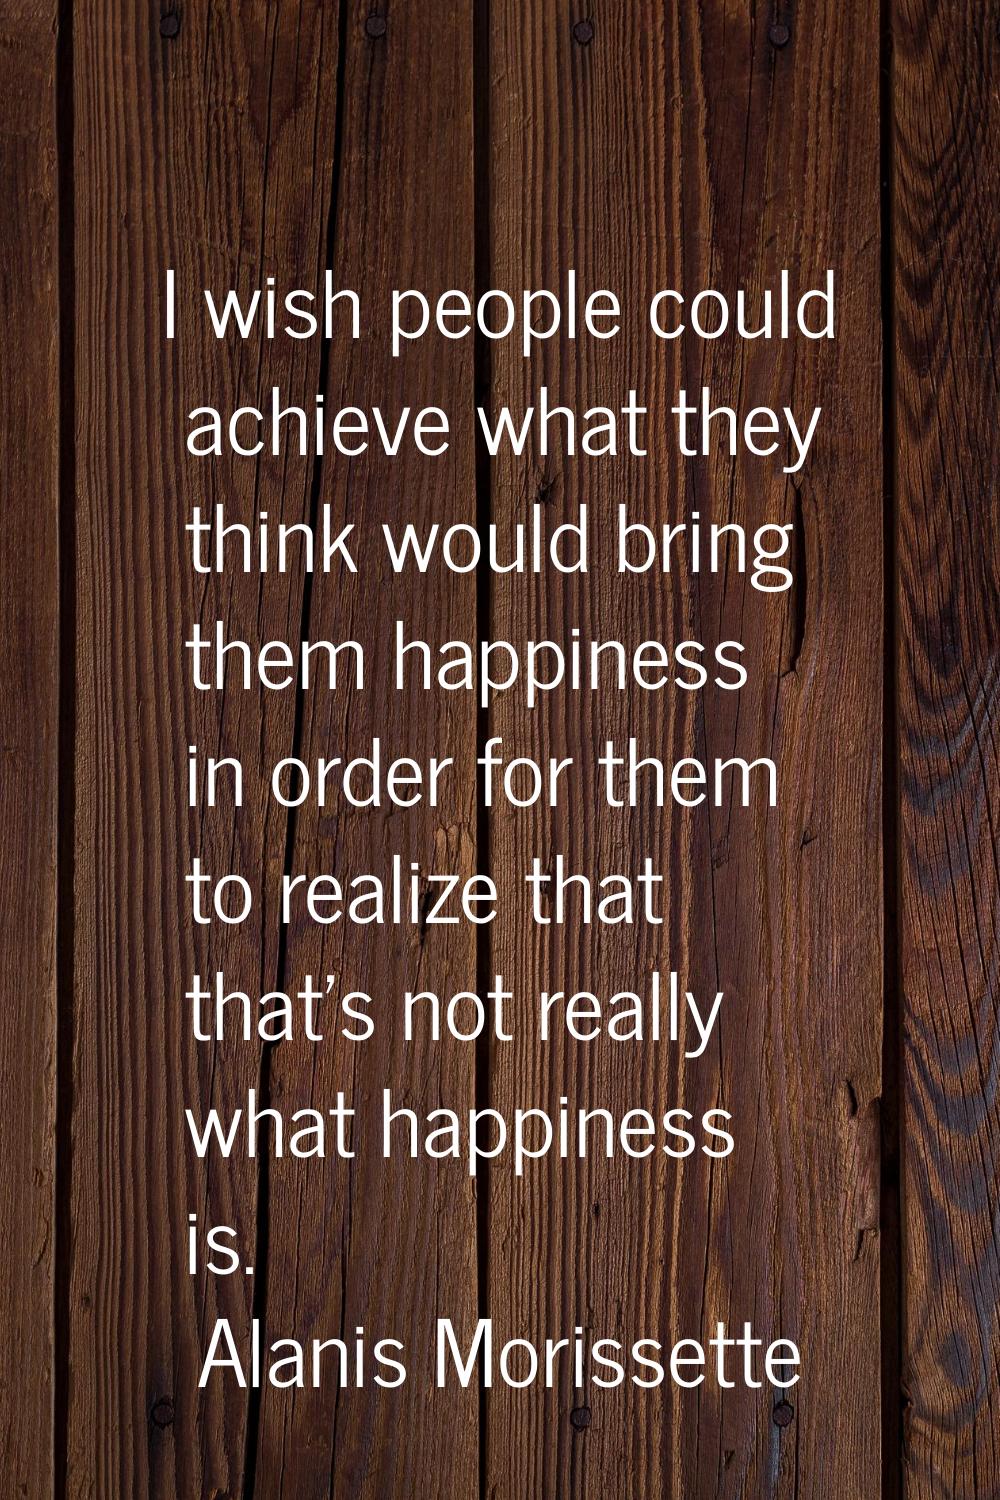 I wish people could achieve what they think would bring them happiness in order for them to realize